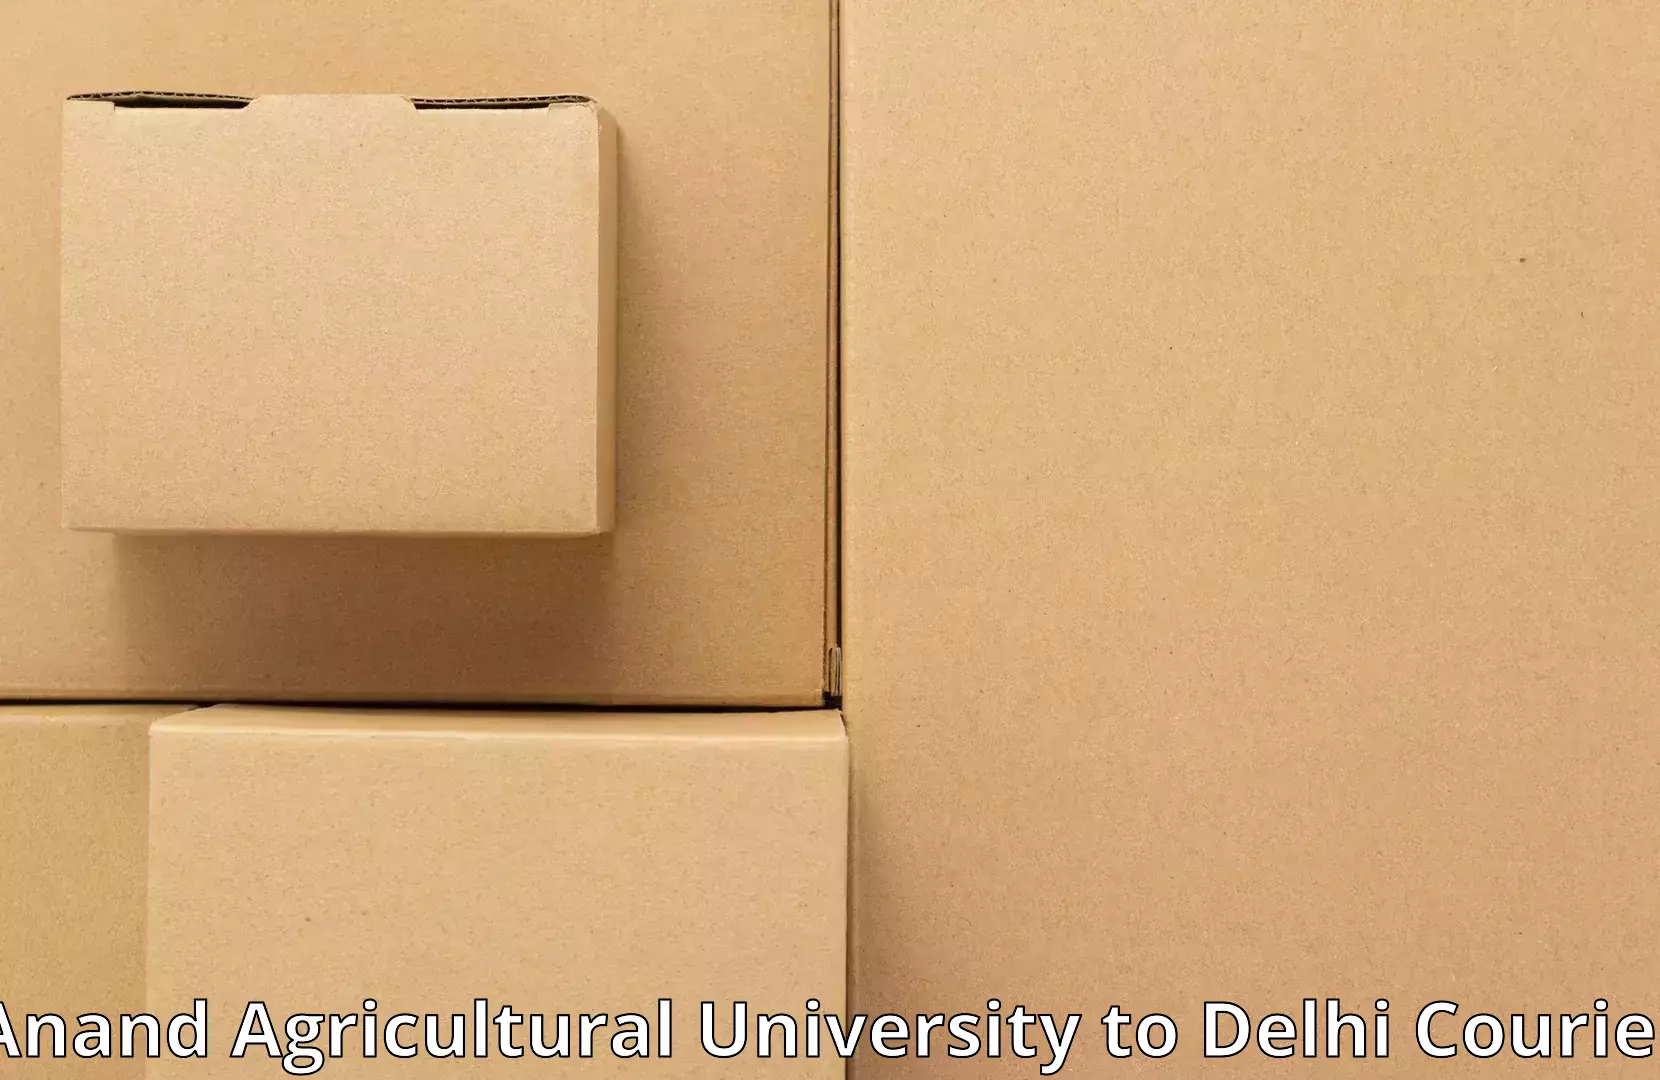 Residential relocation services Anand Agricultural University to Jamia Hamdard New Delhi